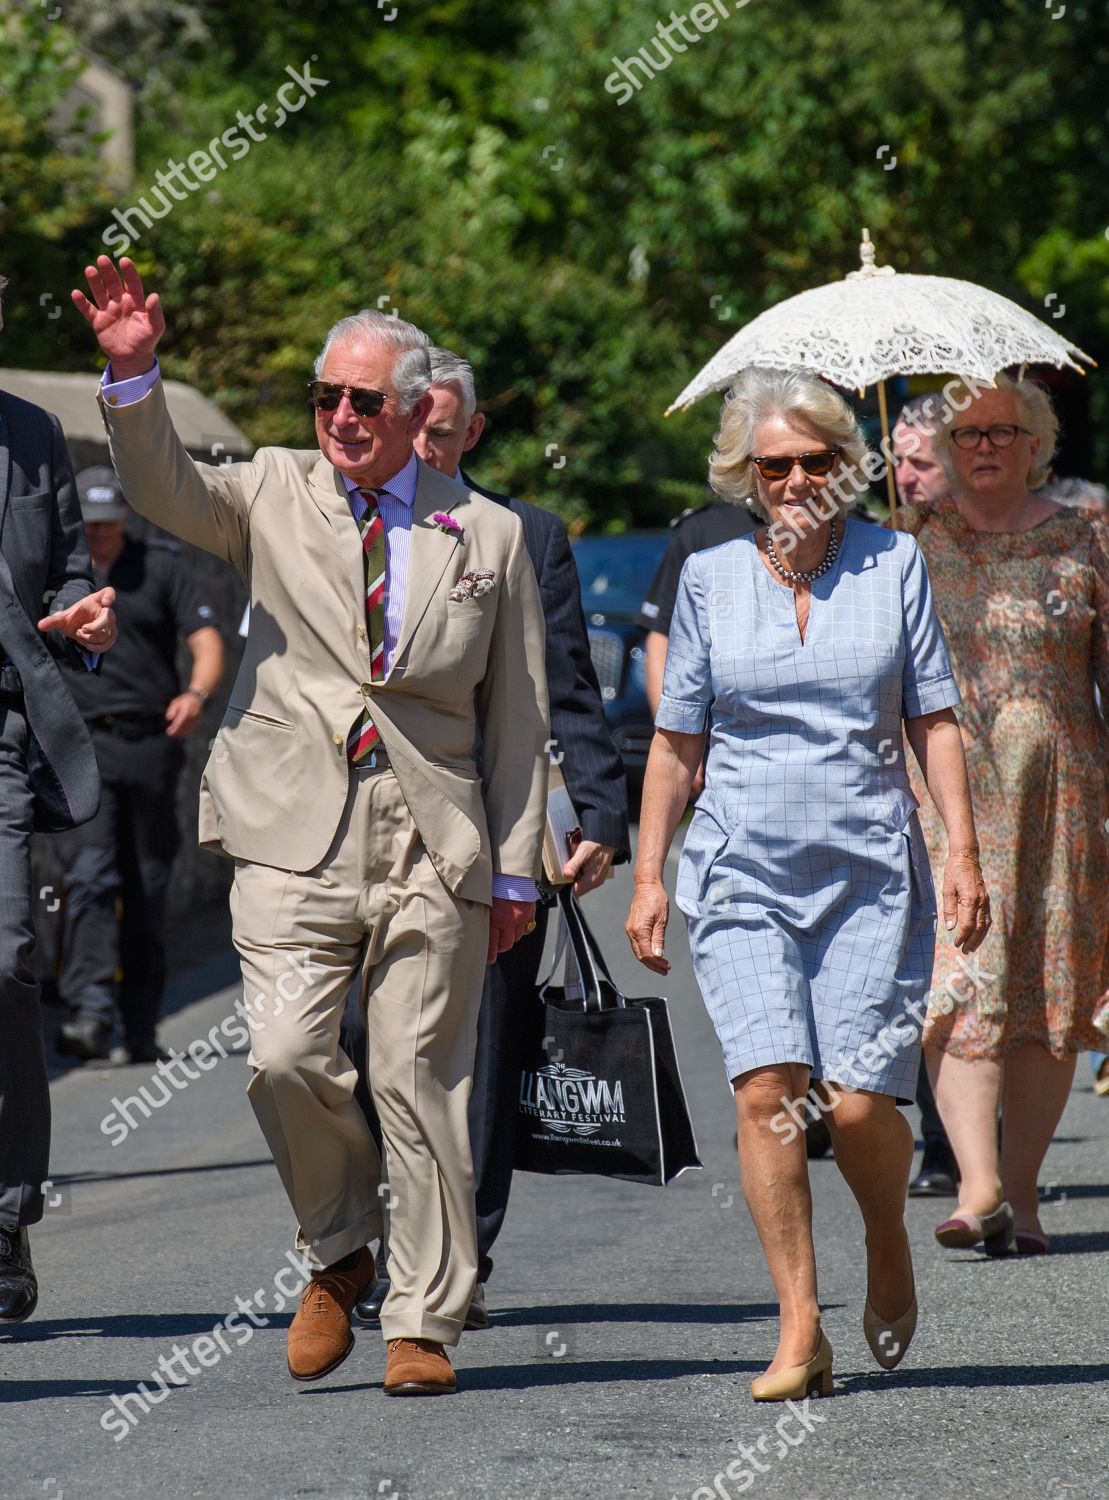 prince-charles-and-camilla-duchess-of-cornwall-visiting-to-wales-day-2-uk-shutterstock-editorial-9733343cf.jpg